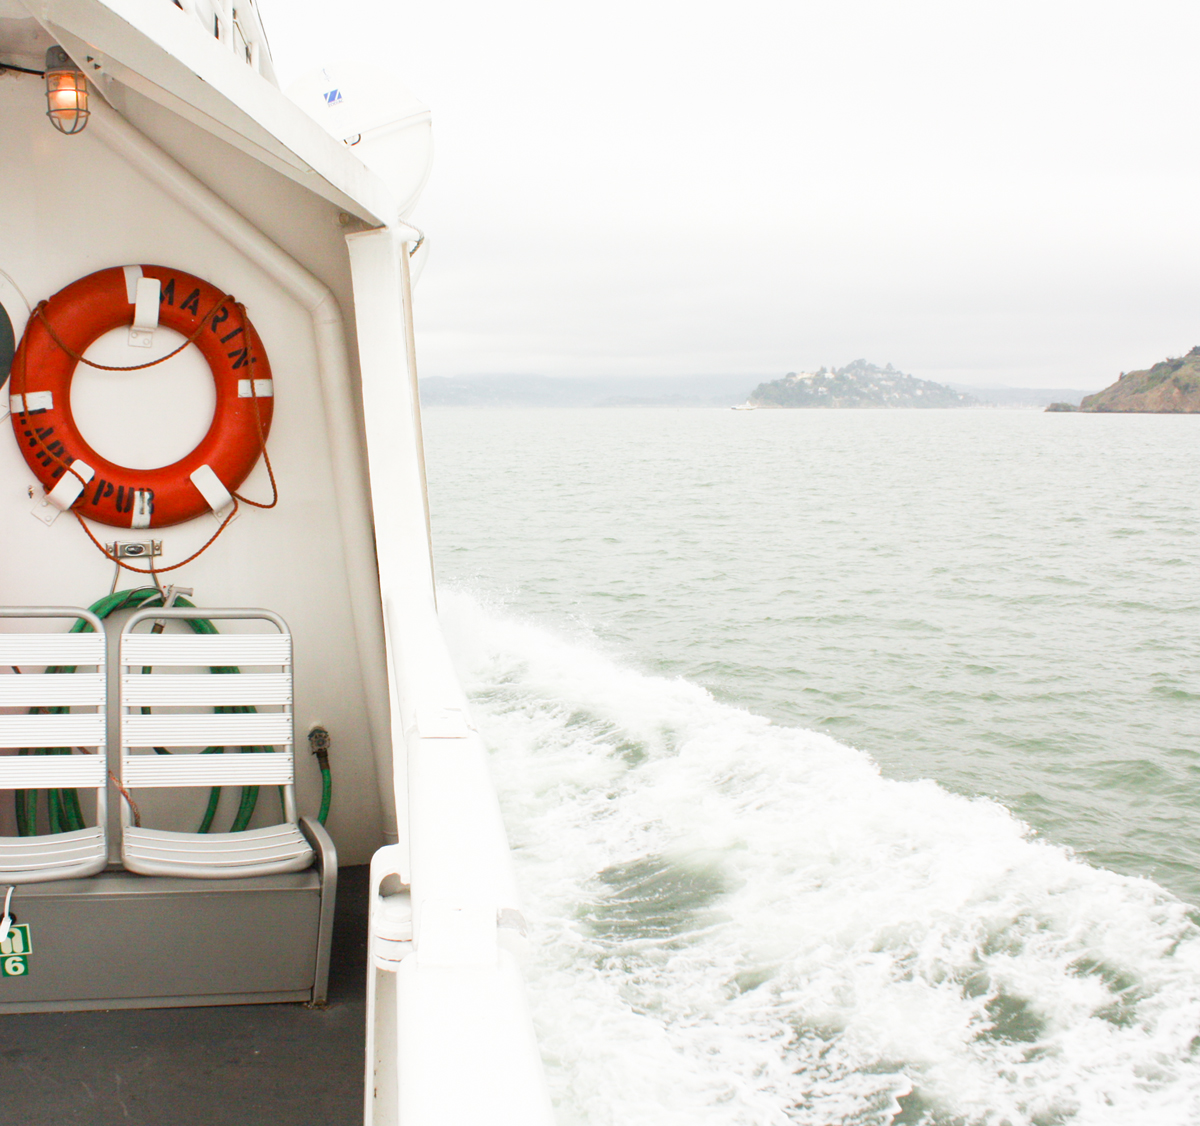 lifesaver on a boat on san francisco bay in the fog